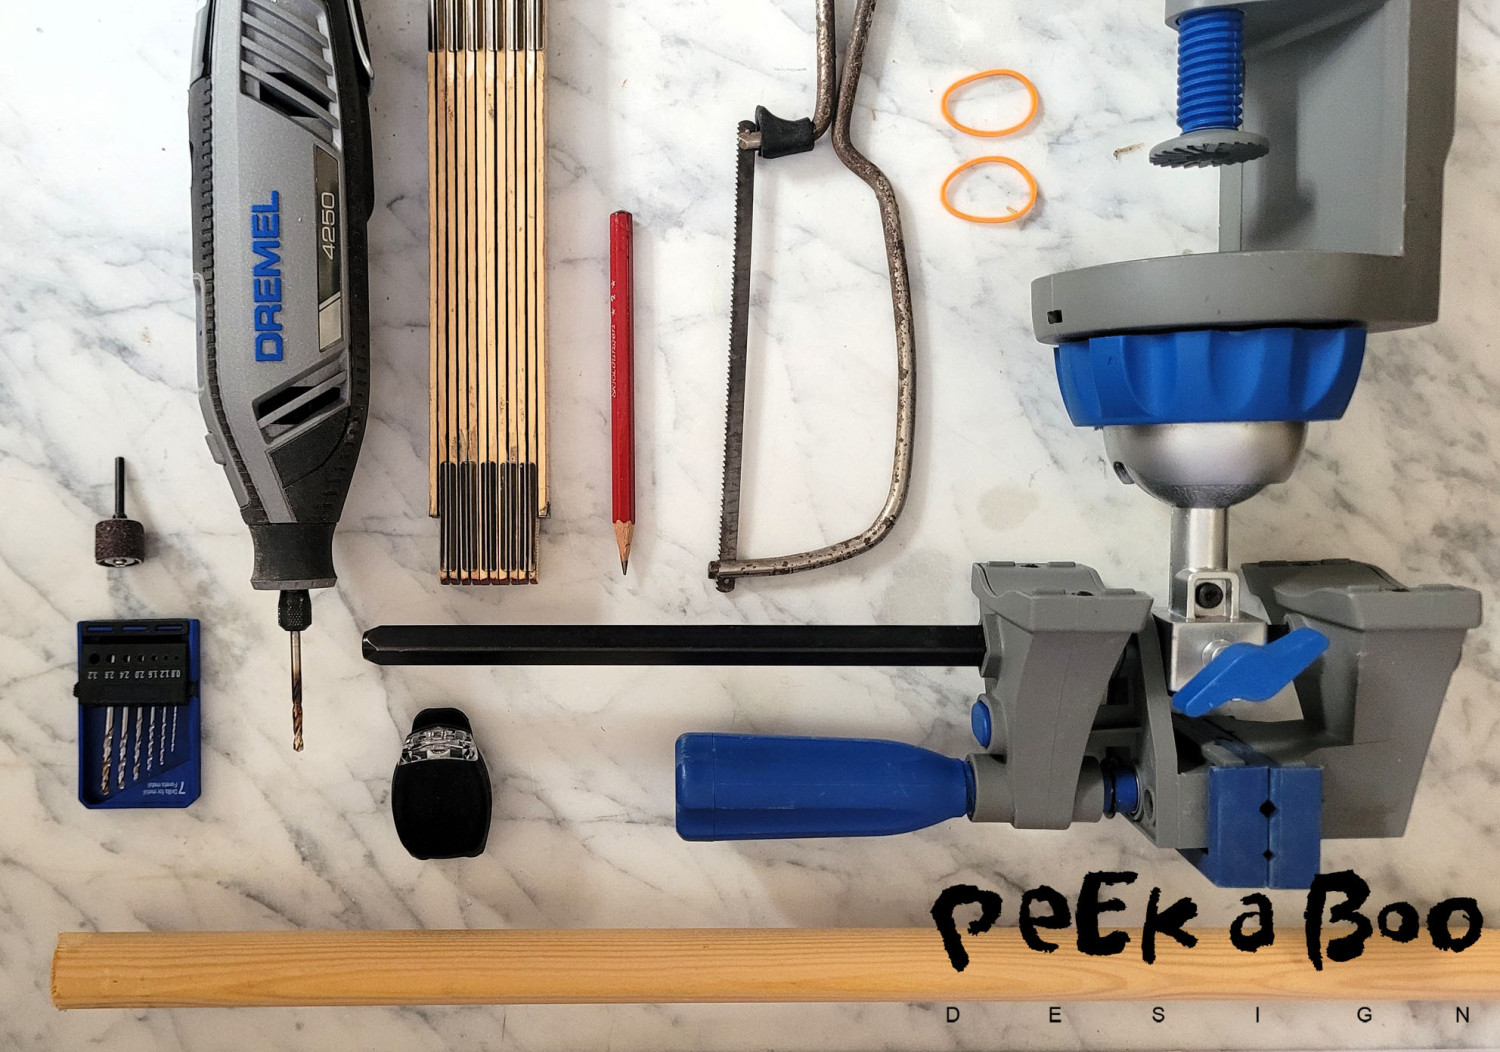 The materials and tools you need for this project.